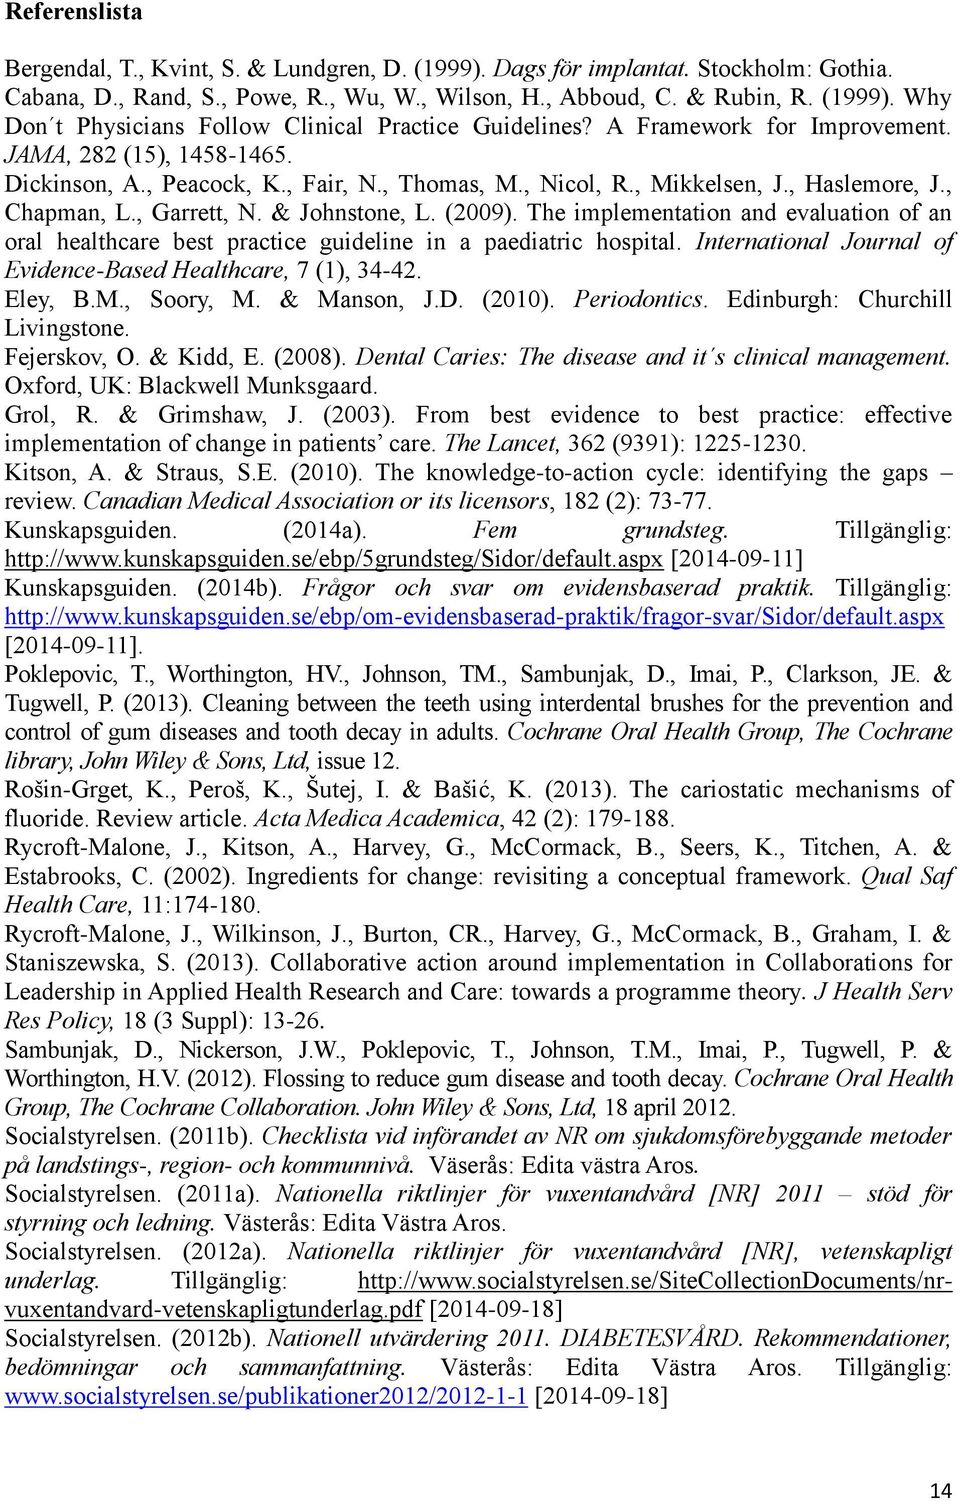 The implementation and evaluation of an oral healthcare best practice guideline in a paediatric hospital. International Journal of Evidence-Based Healthcare, 7 (1), 34-42. Eley, B.M., Soory, M.